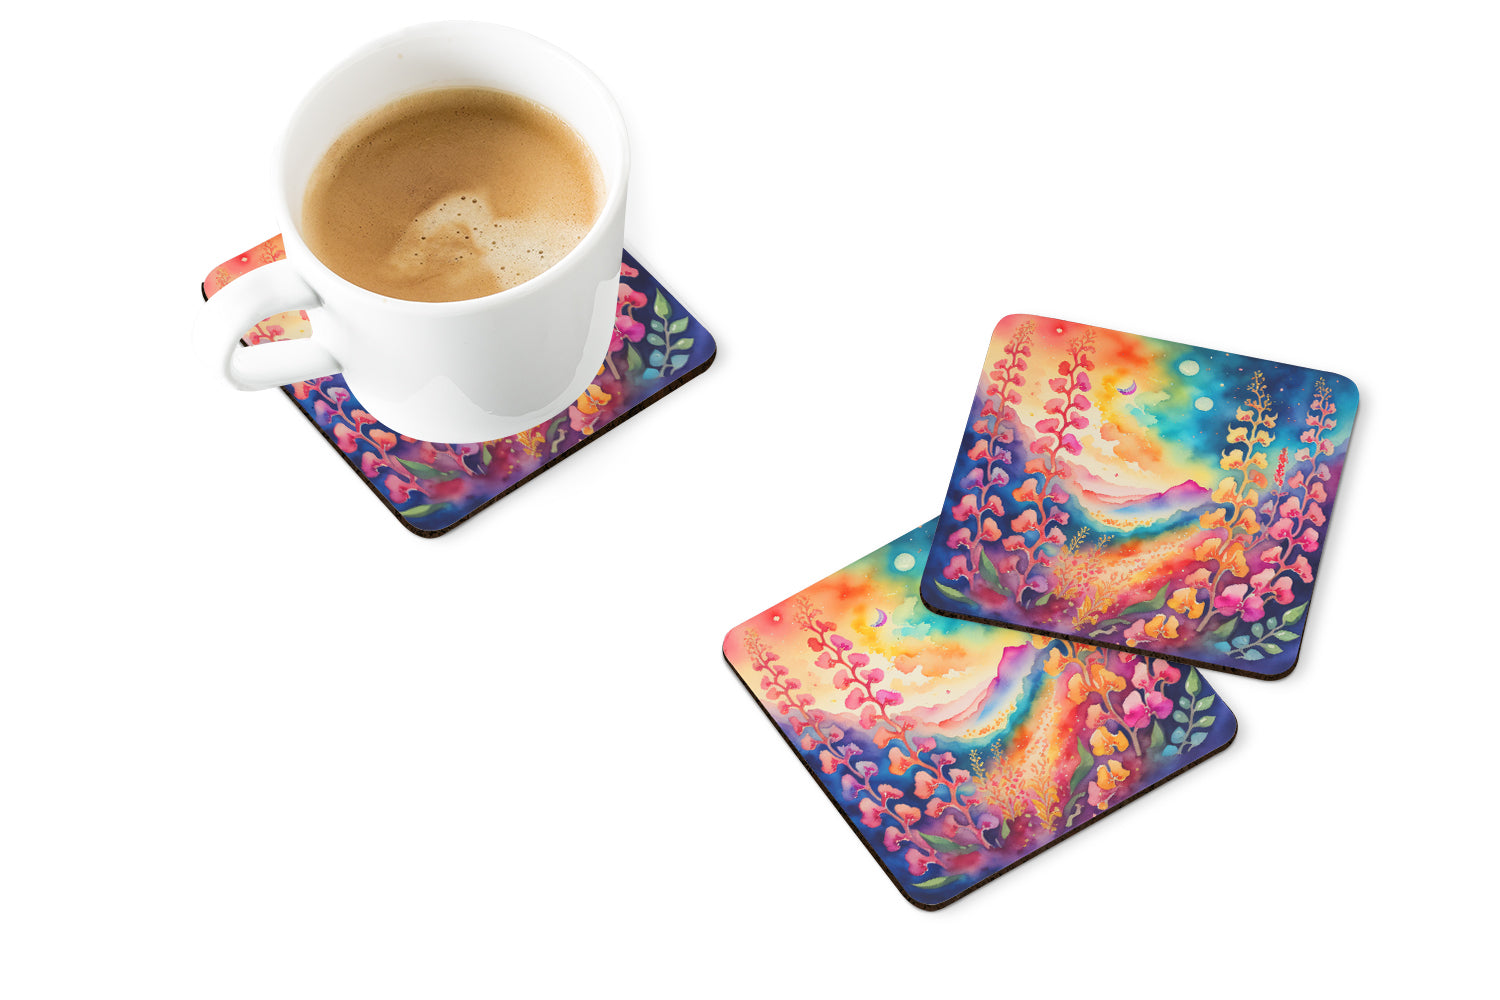 Buy this Colorful Snapdragon Foam Coaster Set of 4